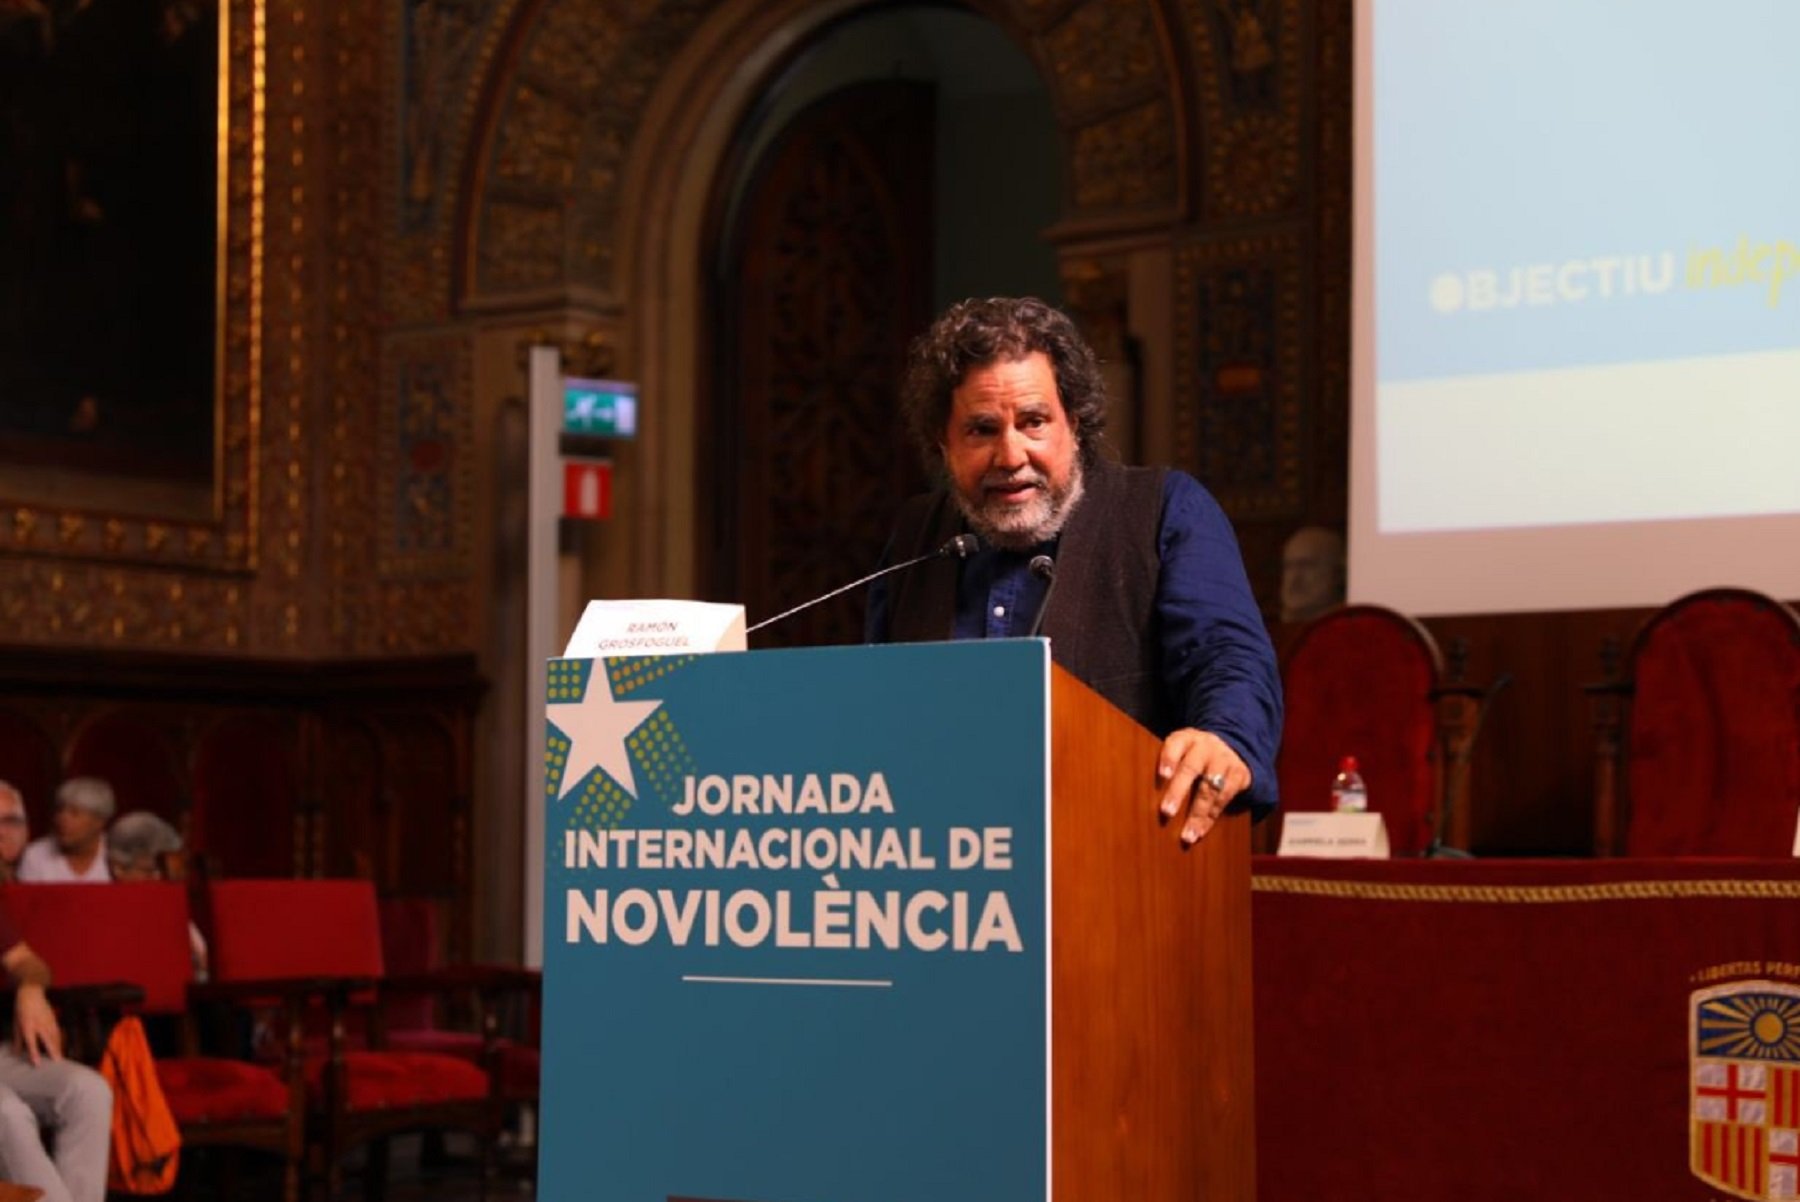 Decolonization expert: "Despite the blackmail, Catalan society won't give in"